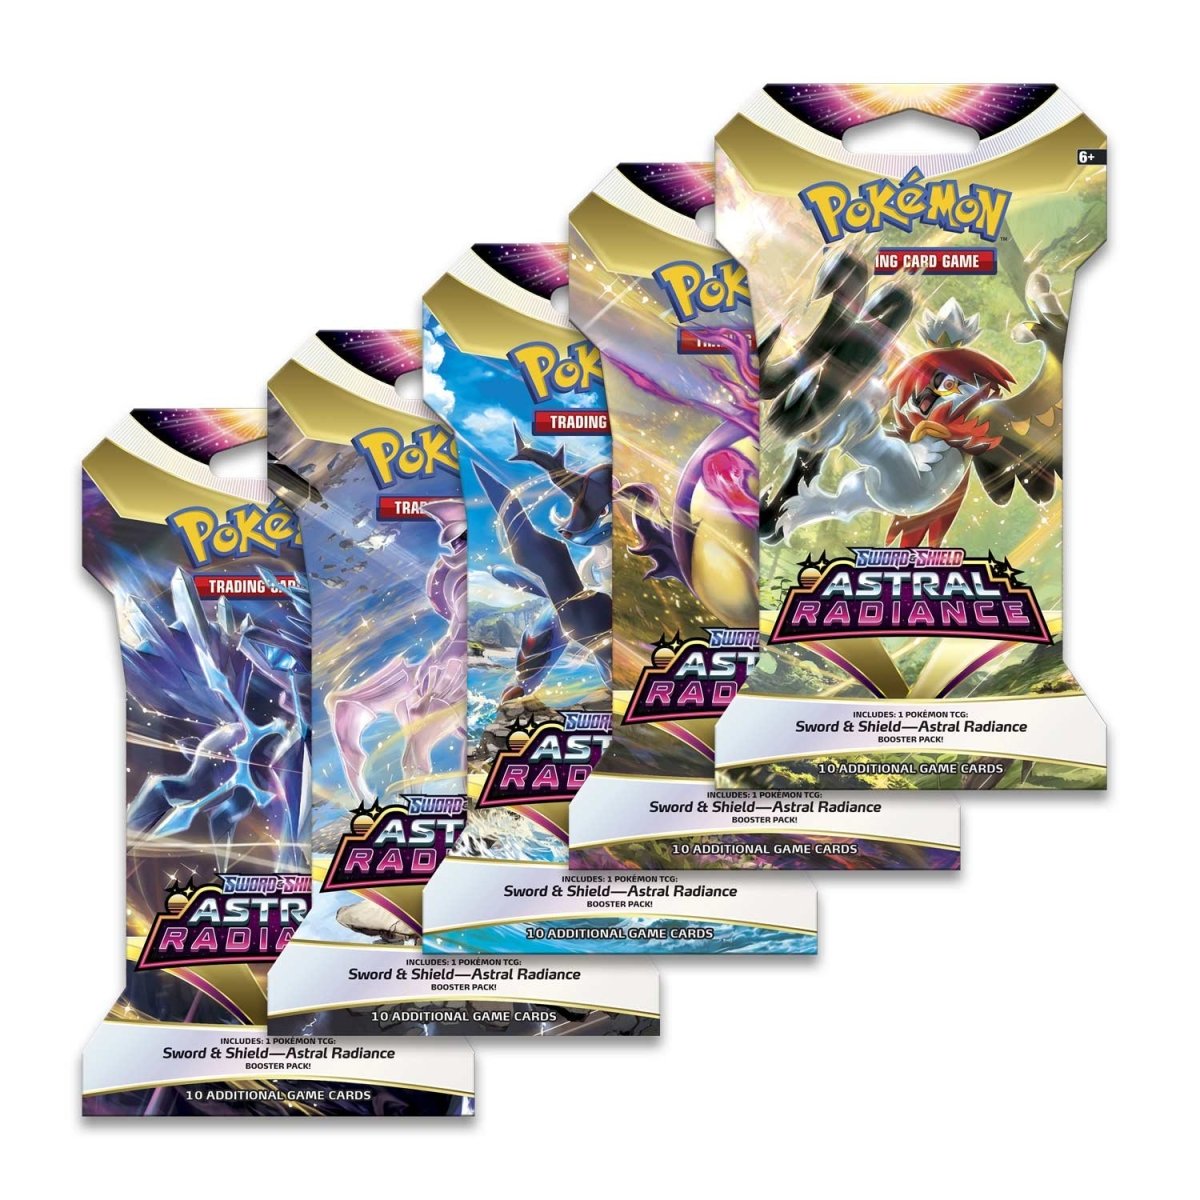 Pokemon Trading Card Game Online - Sword & Shield-Astral Radiance Sleeved Booster Pack Key